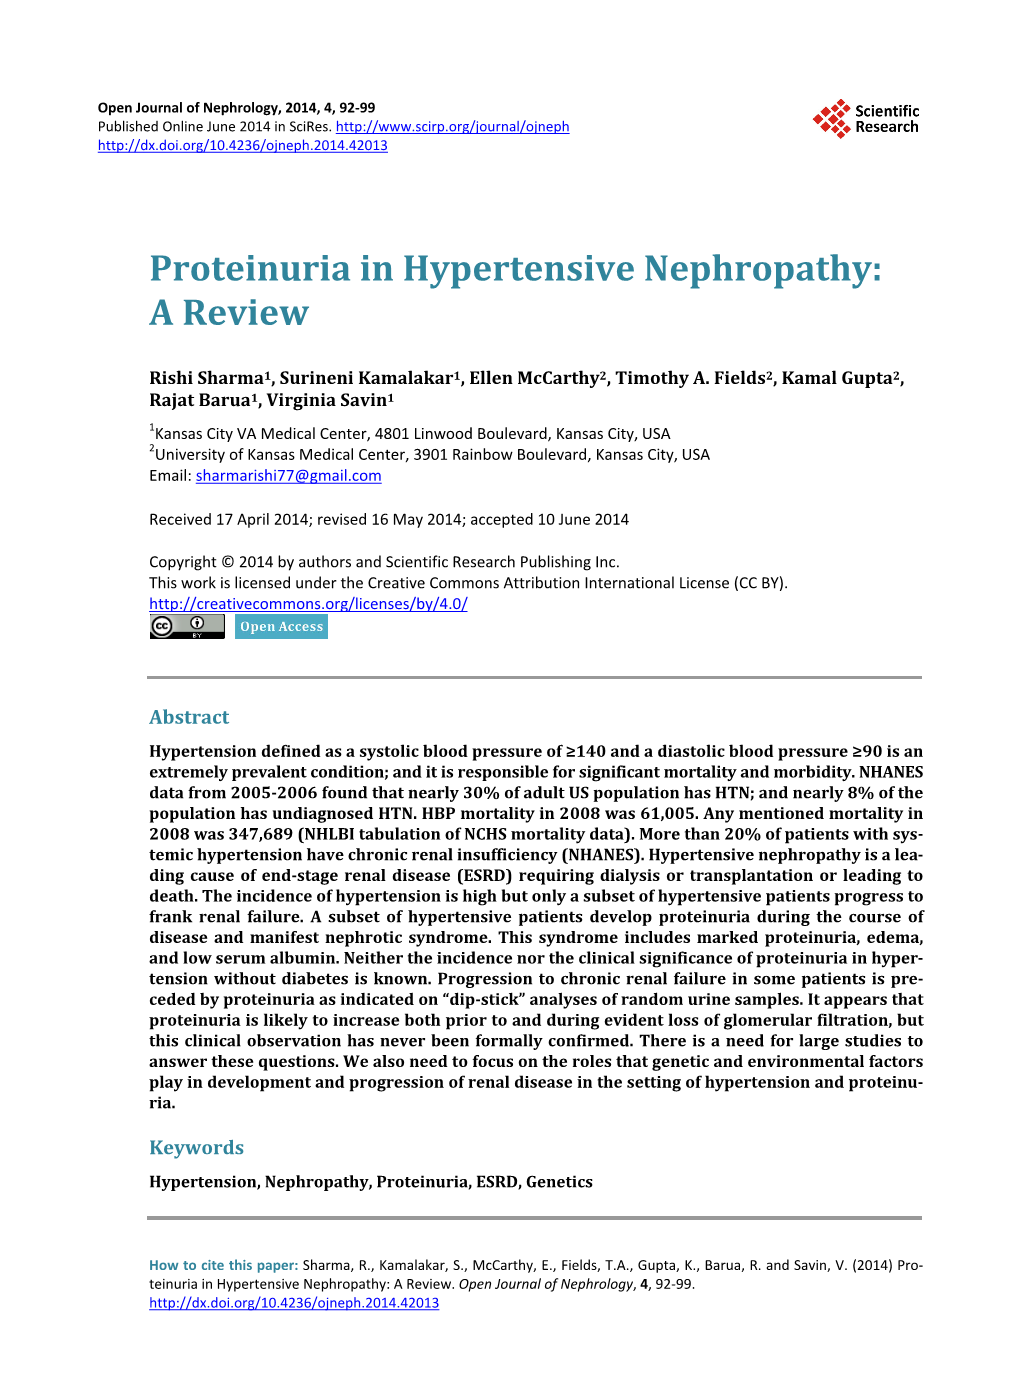 Proteinuria in Hypertensive Nephropathy: a Review